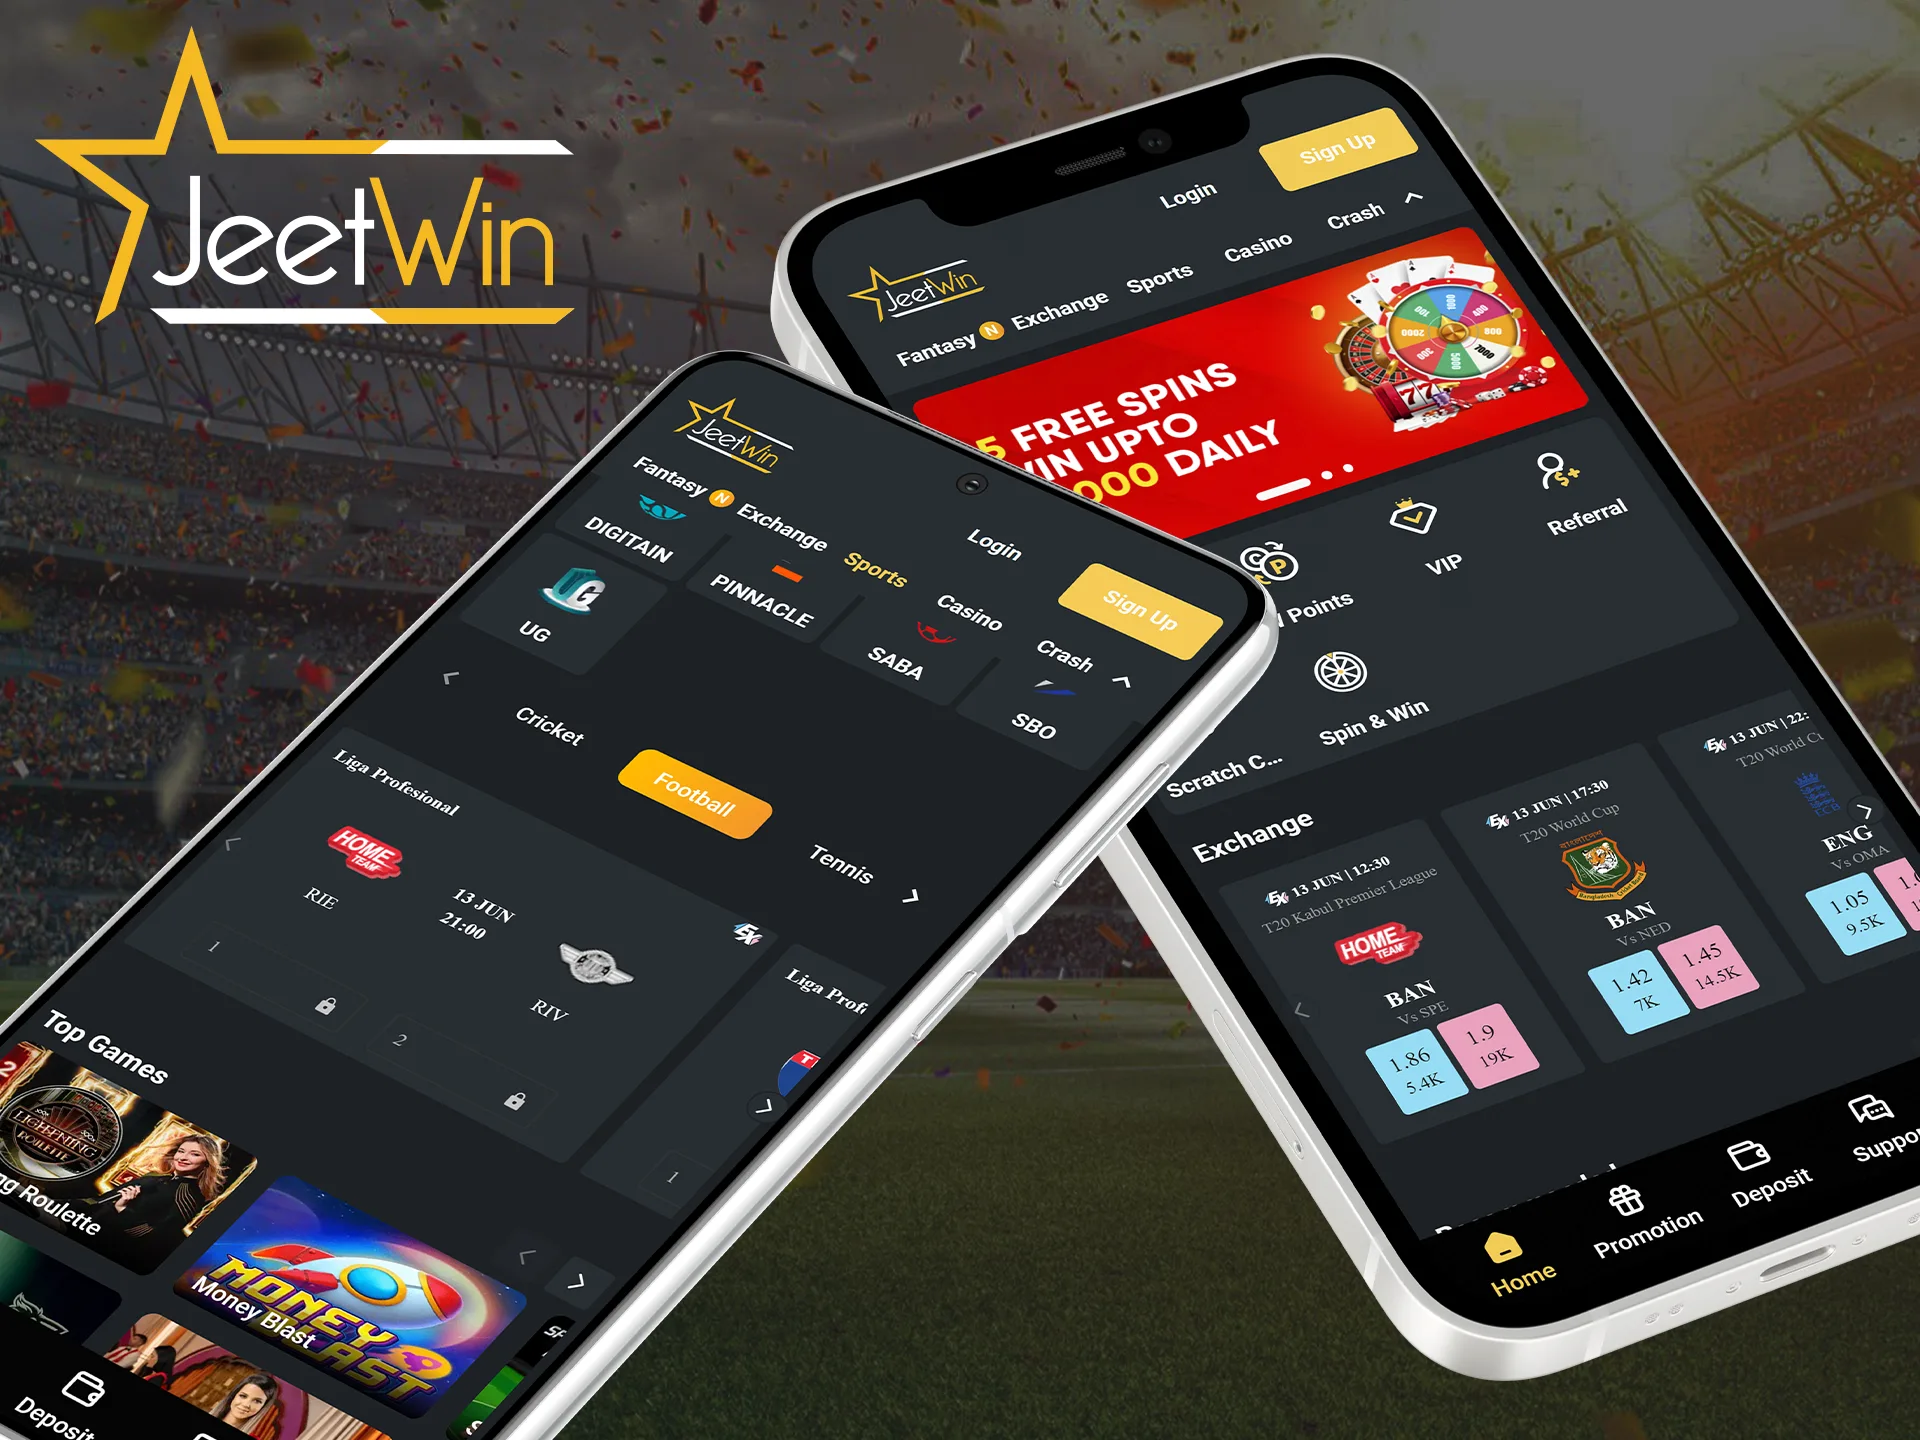 You can bet on football in the Jeetwin mobile app.